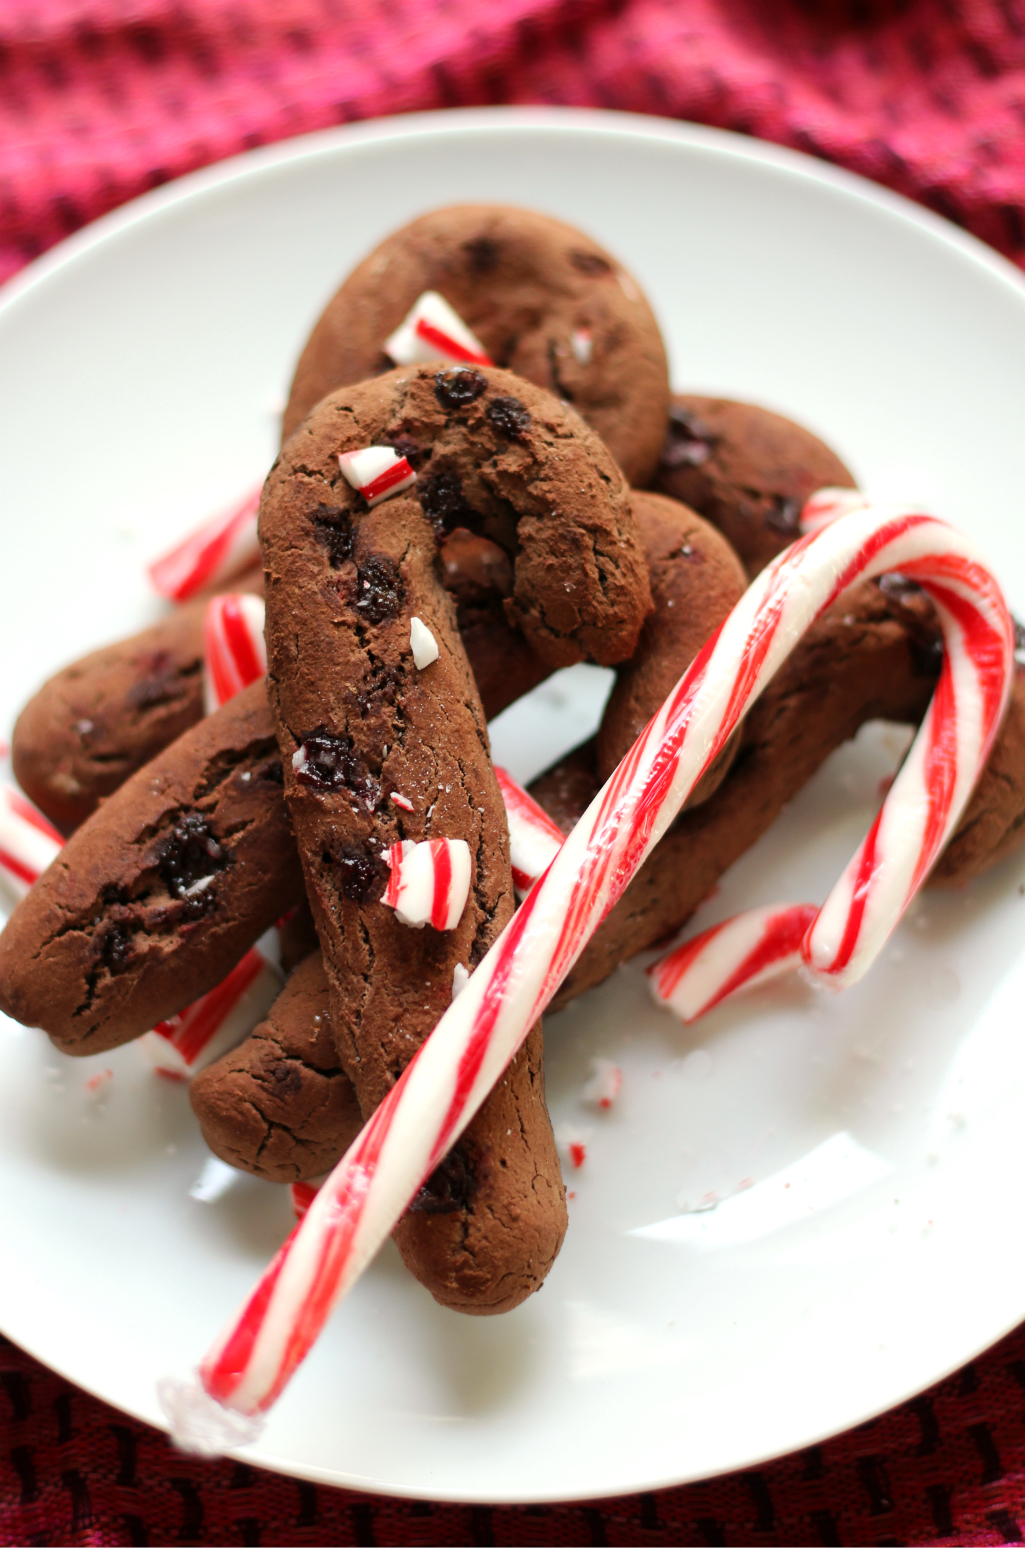 Chocolate Candy Cane Crunch Cookies | Strength and Sunshine @RebeccaGF666 Naughty or nice, baking these cookies will put you on the nice list! Chocolate Candy Cane Crunch Cookies to celebrate the season! Gluten-free and vegan, healthy and delicious, the perfect chocolate and peppermint holiday cookie dessert recipe for kids of all ages! 